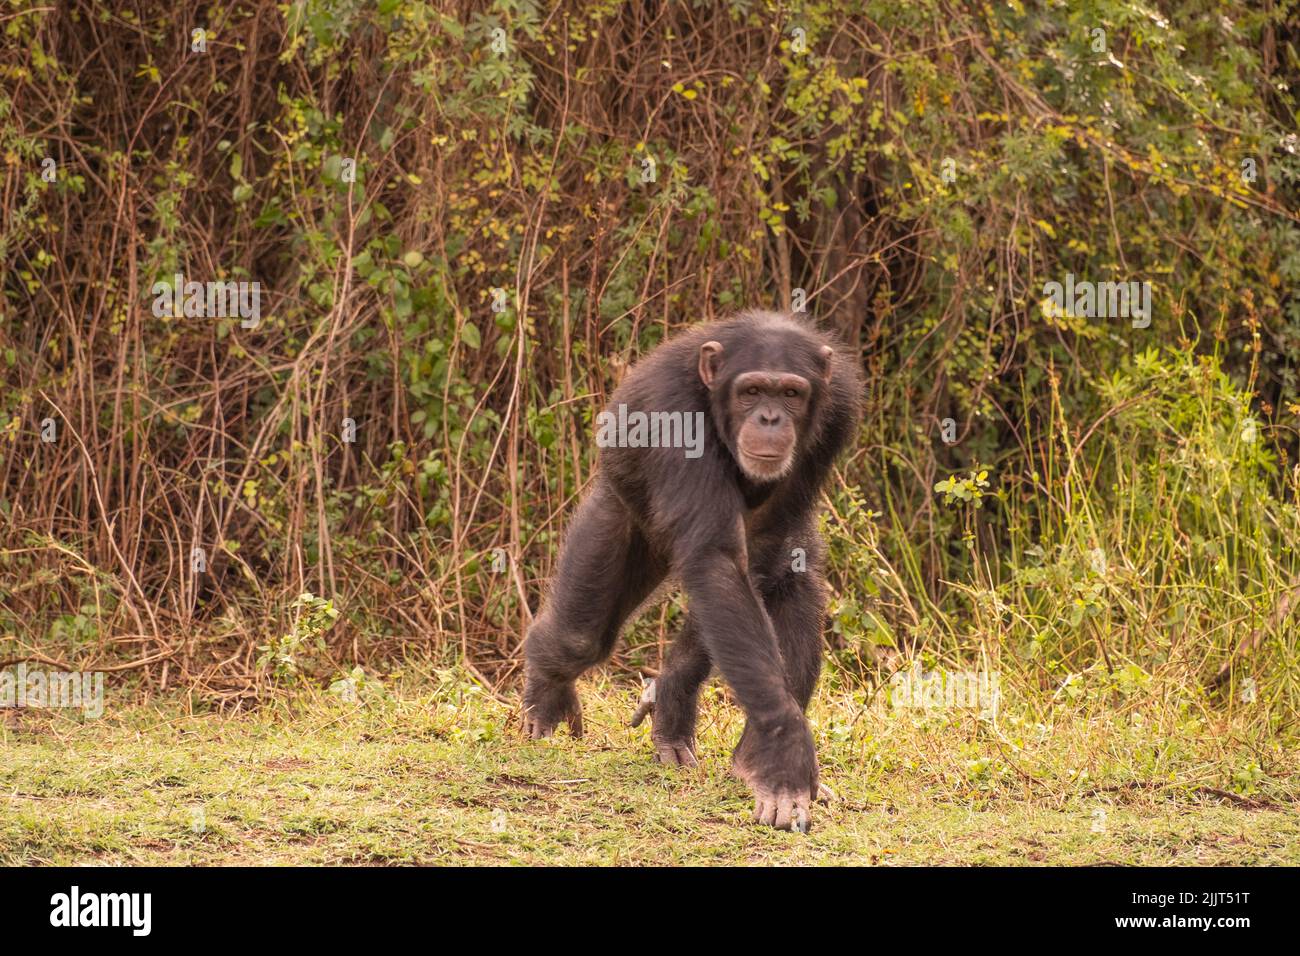 Chimp Walking Alone in The Wilderrness Stock Photo